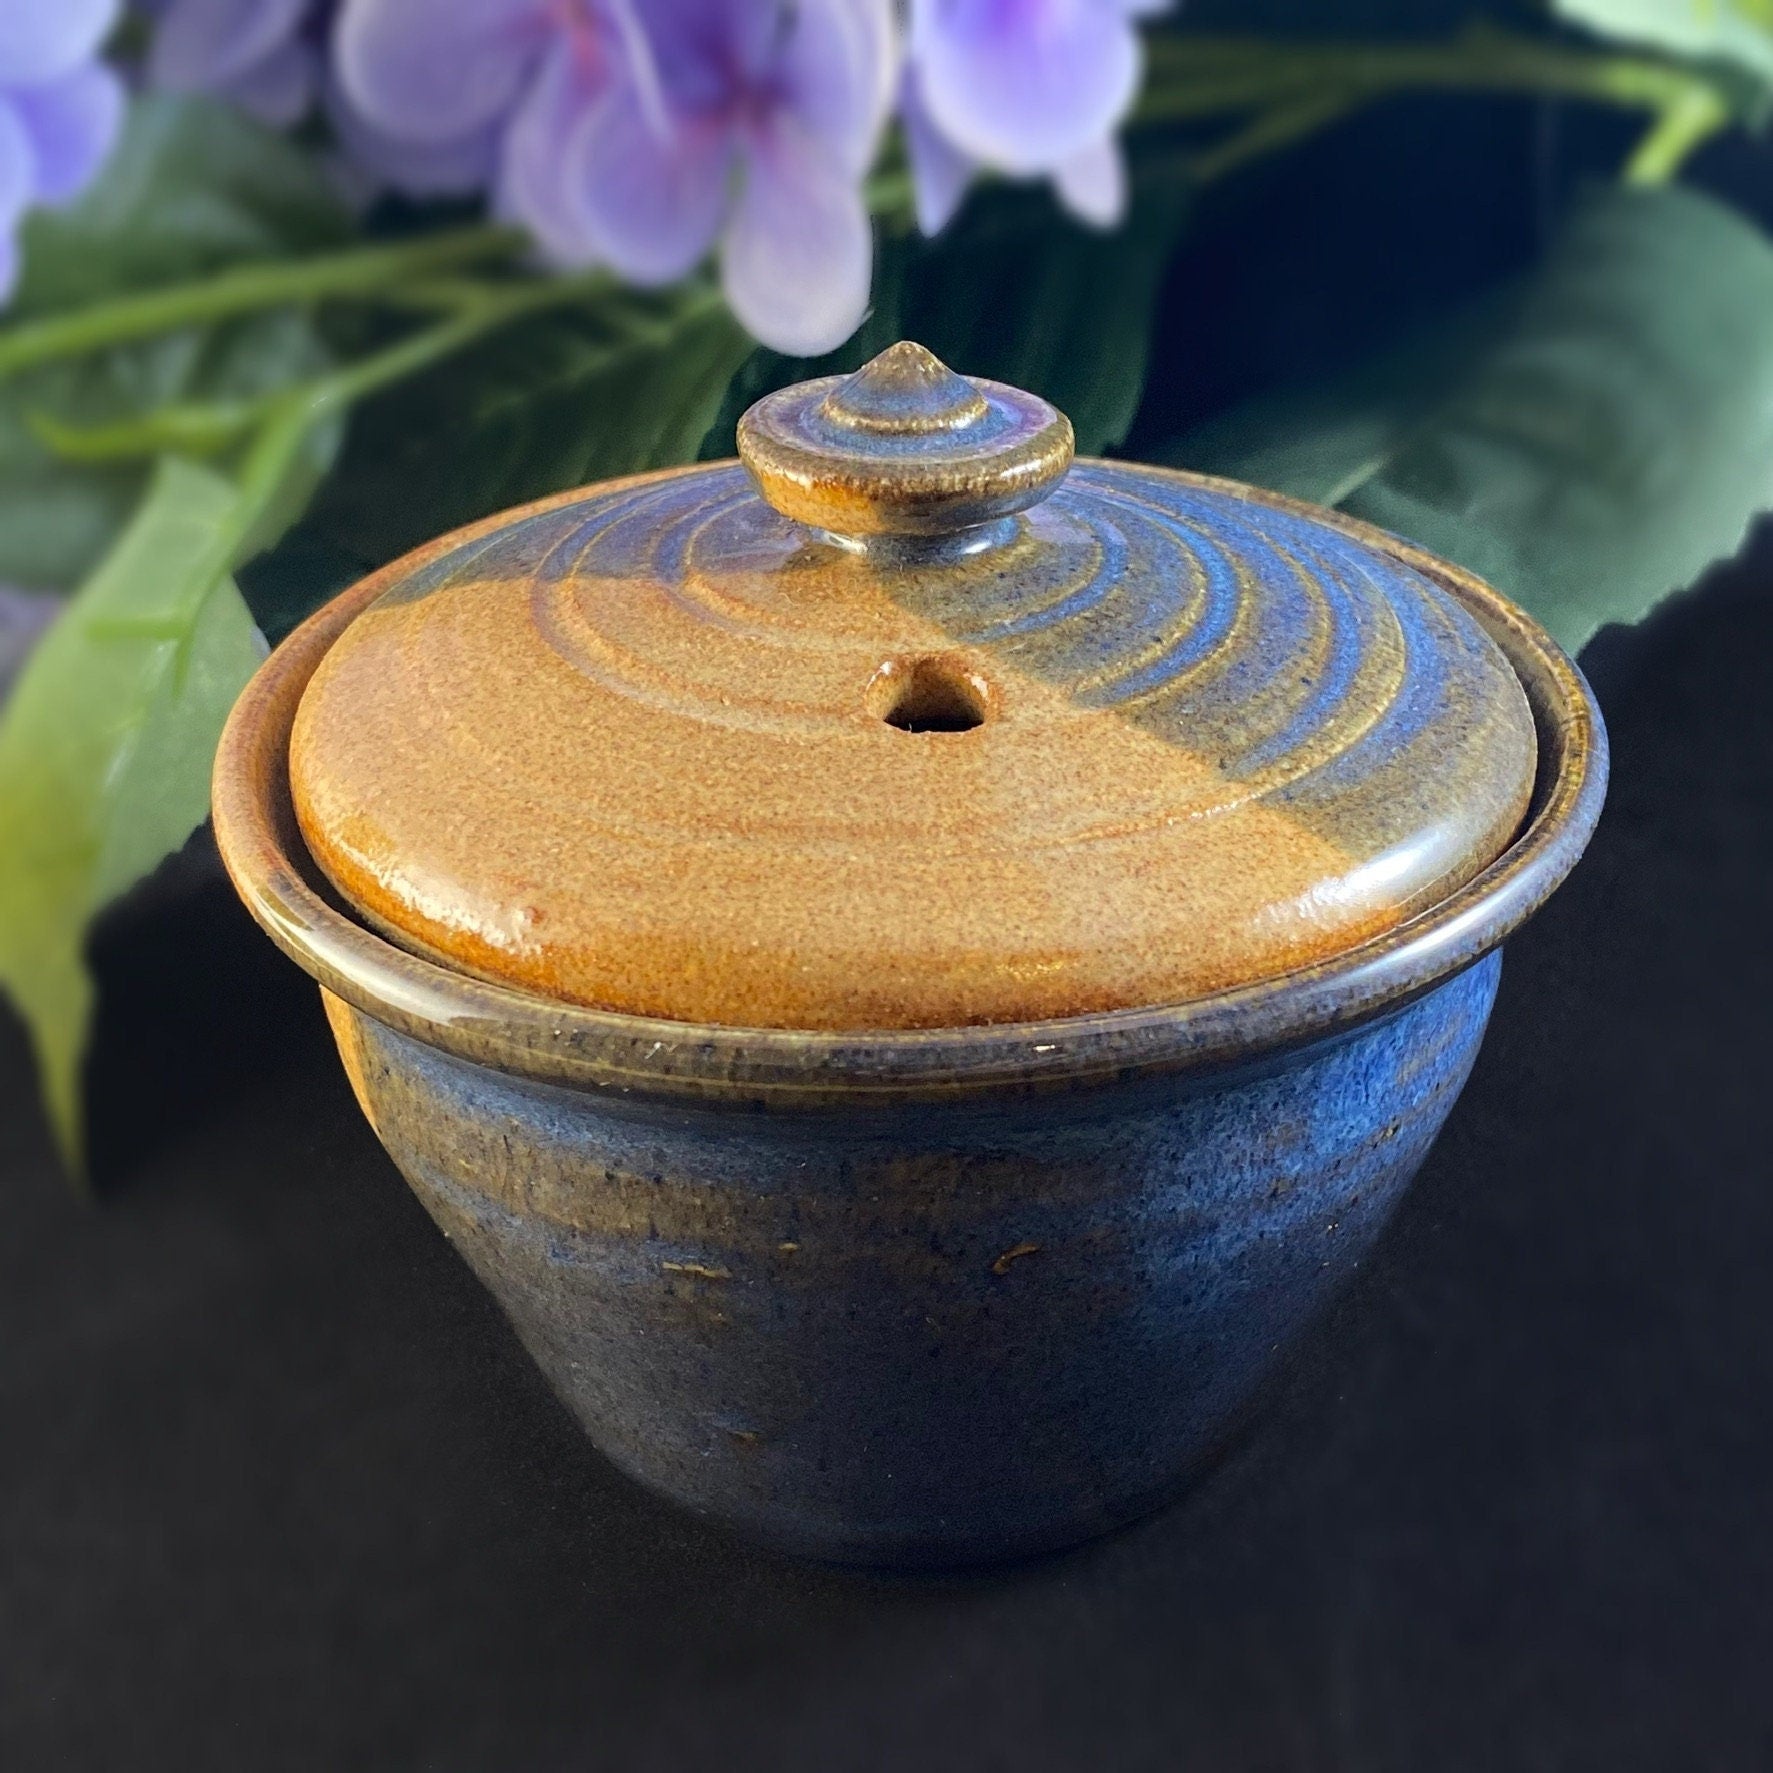 Blue/Tan Ceramic Egg Cooker - Handmade Handcrafted Pottery Made in America